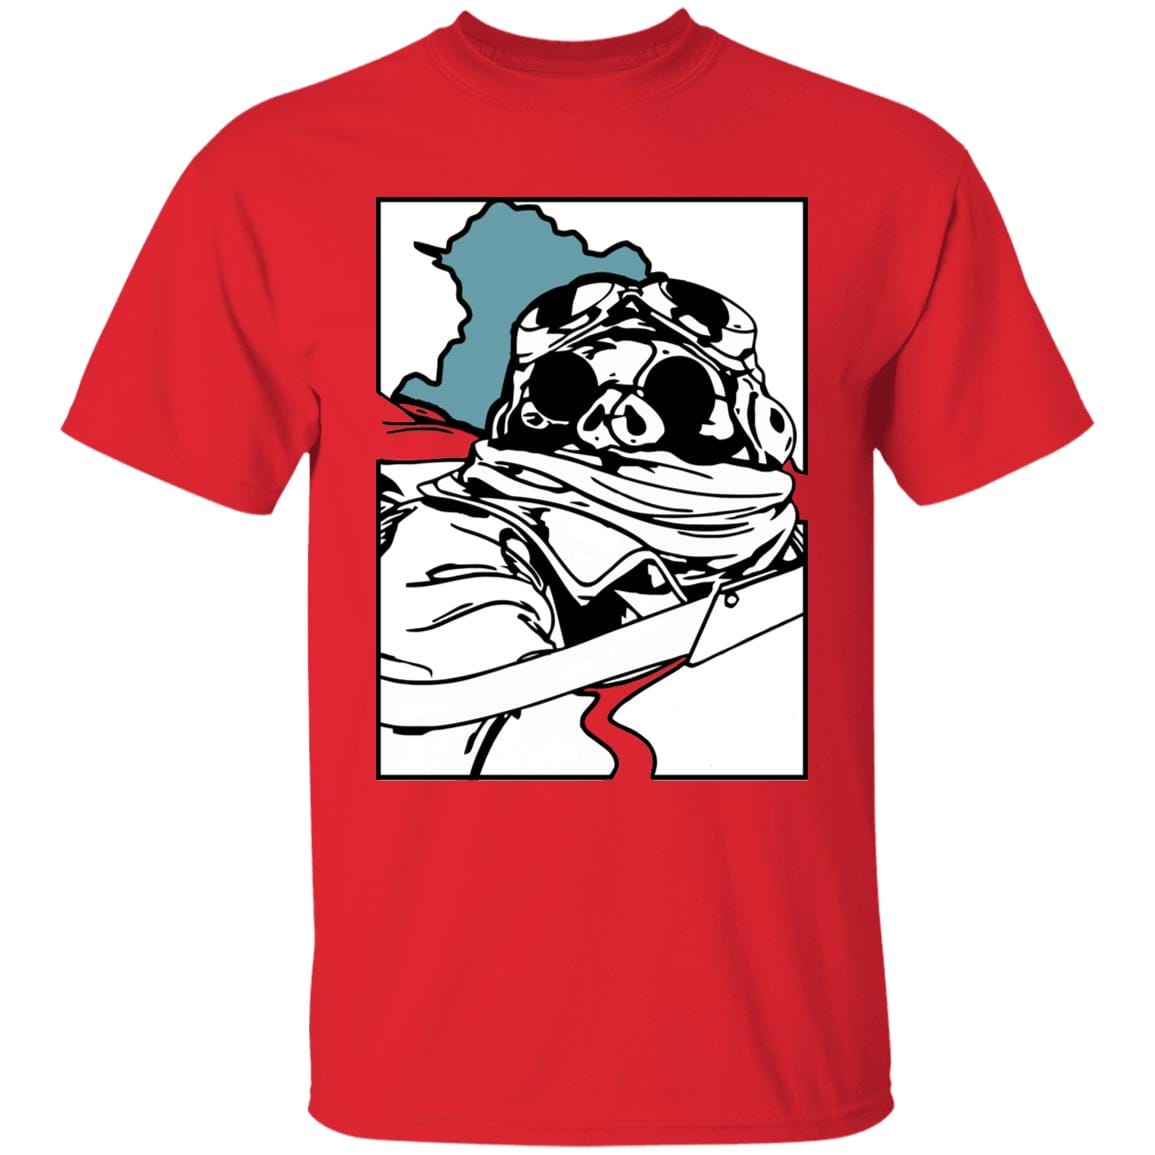 Porco Rosso Poster T Shirt for Kid Ghibli Store ghibli.store